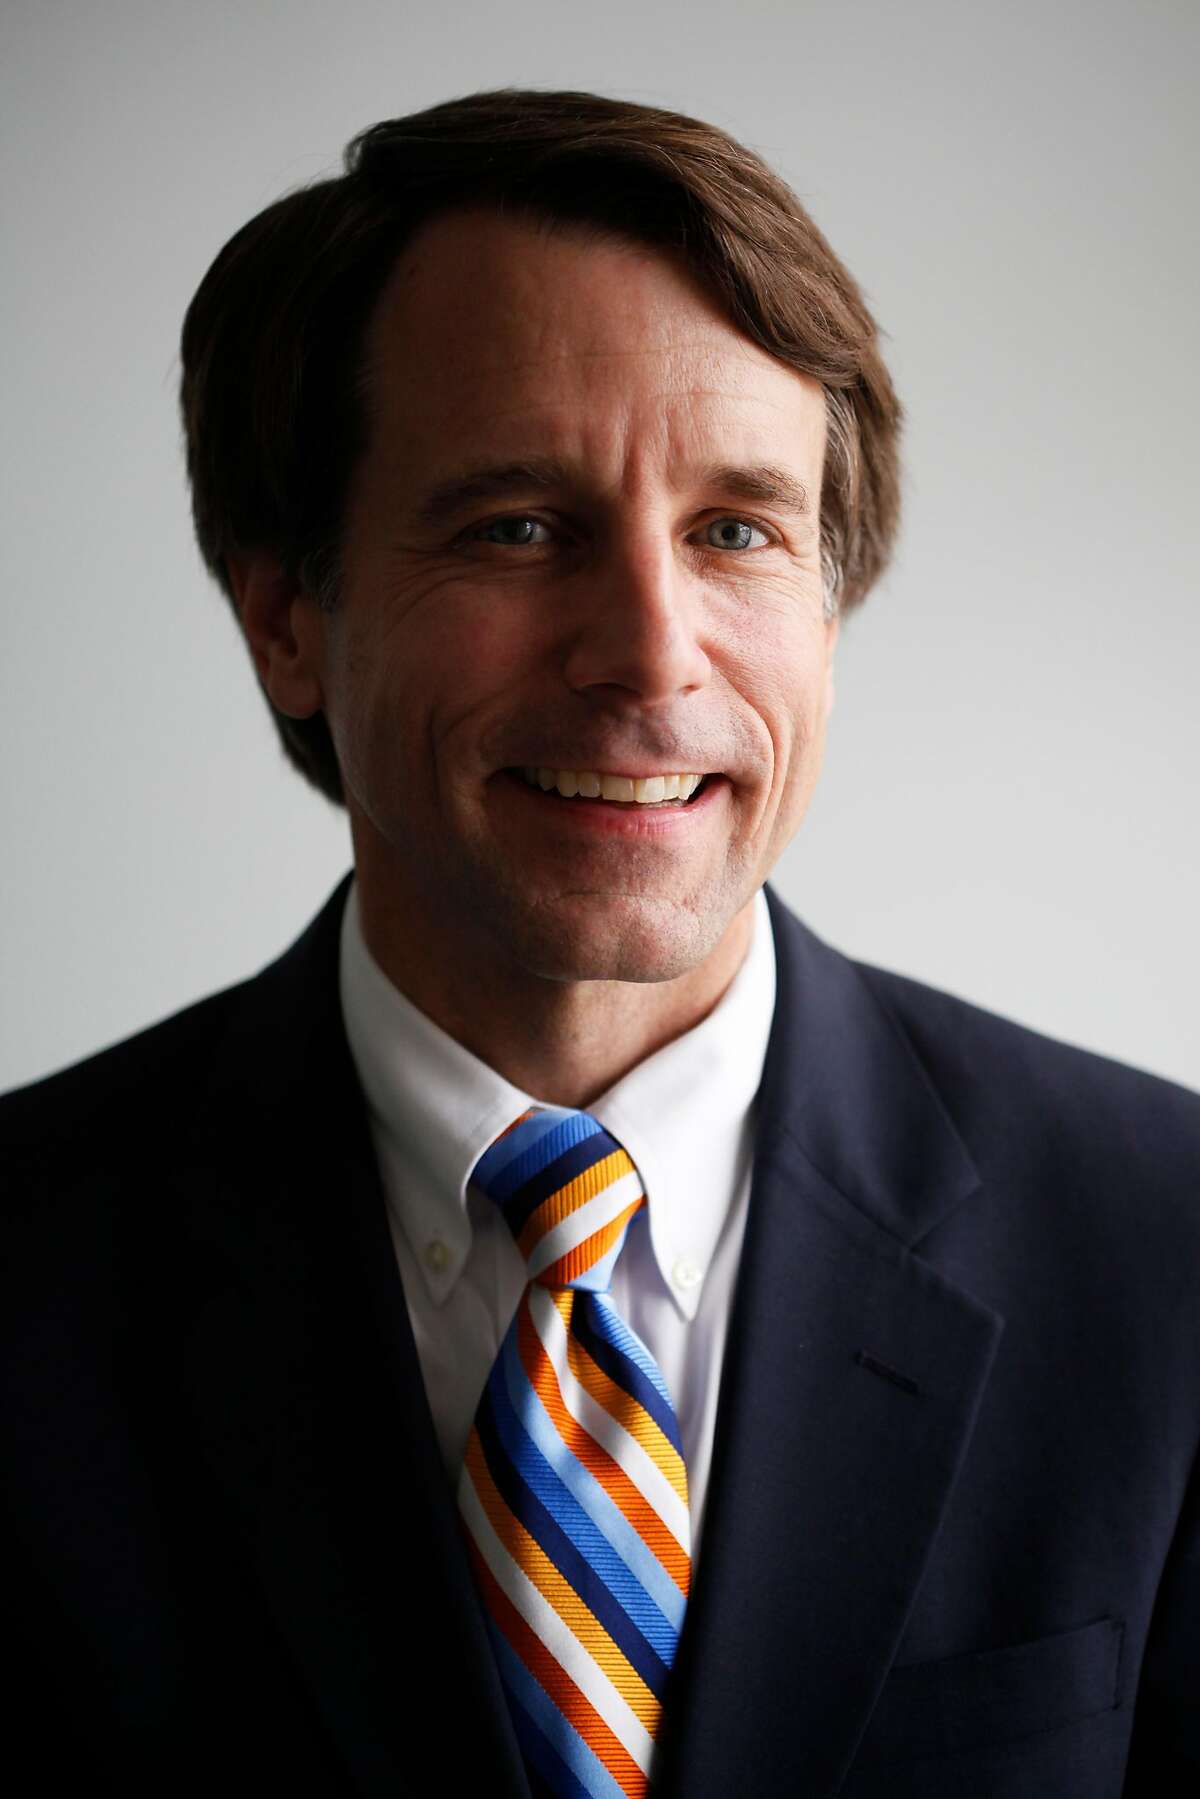 California Insurance Commissioner Dave Jones poses for a portrait at the offices of The Chronicle on August 21, 2014 in San Francisco, Calif.